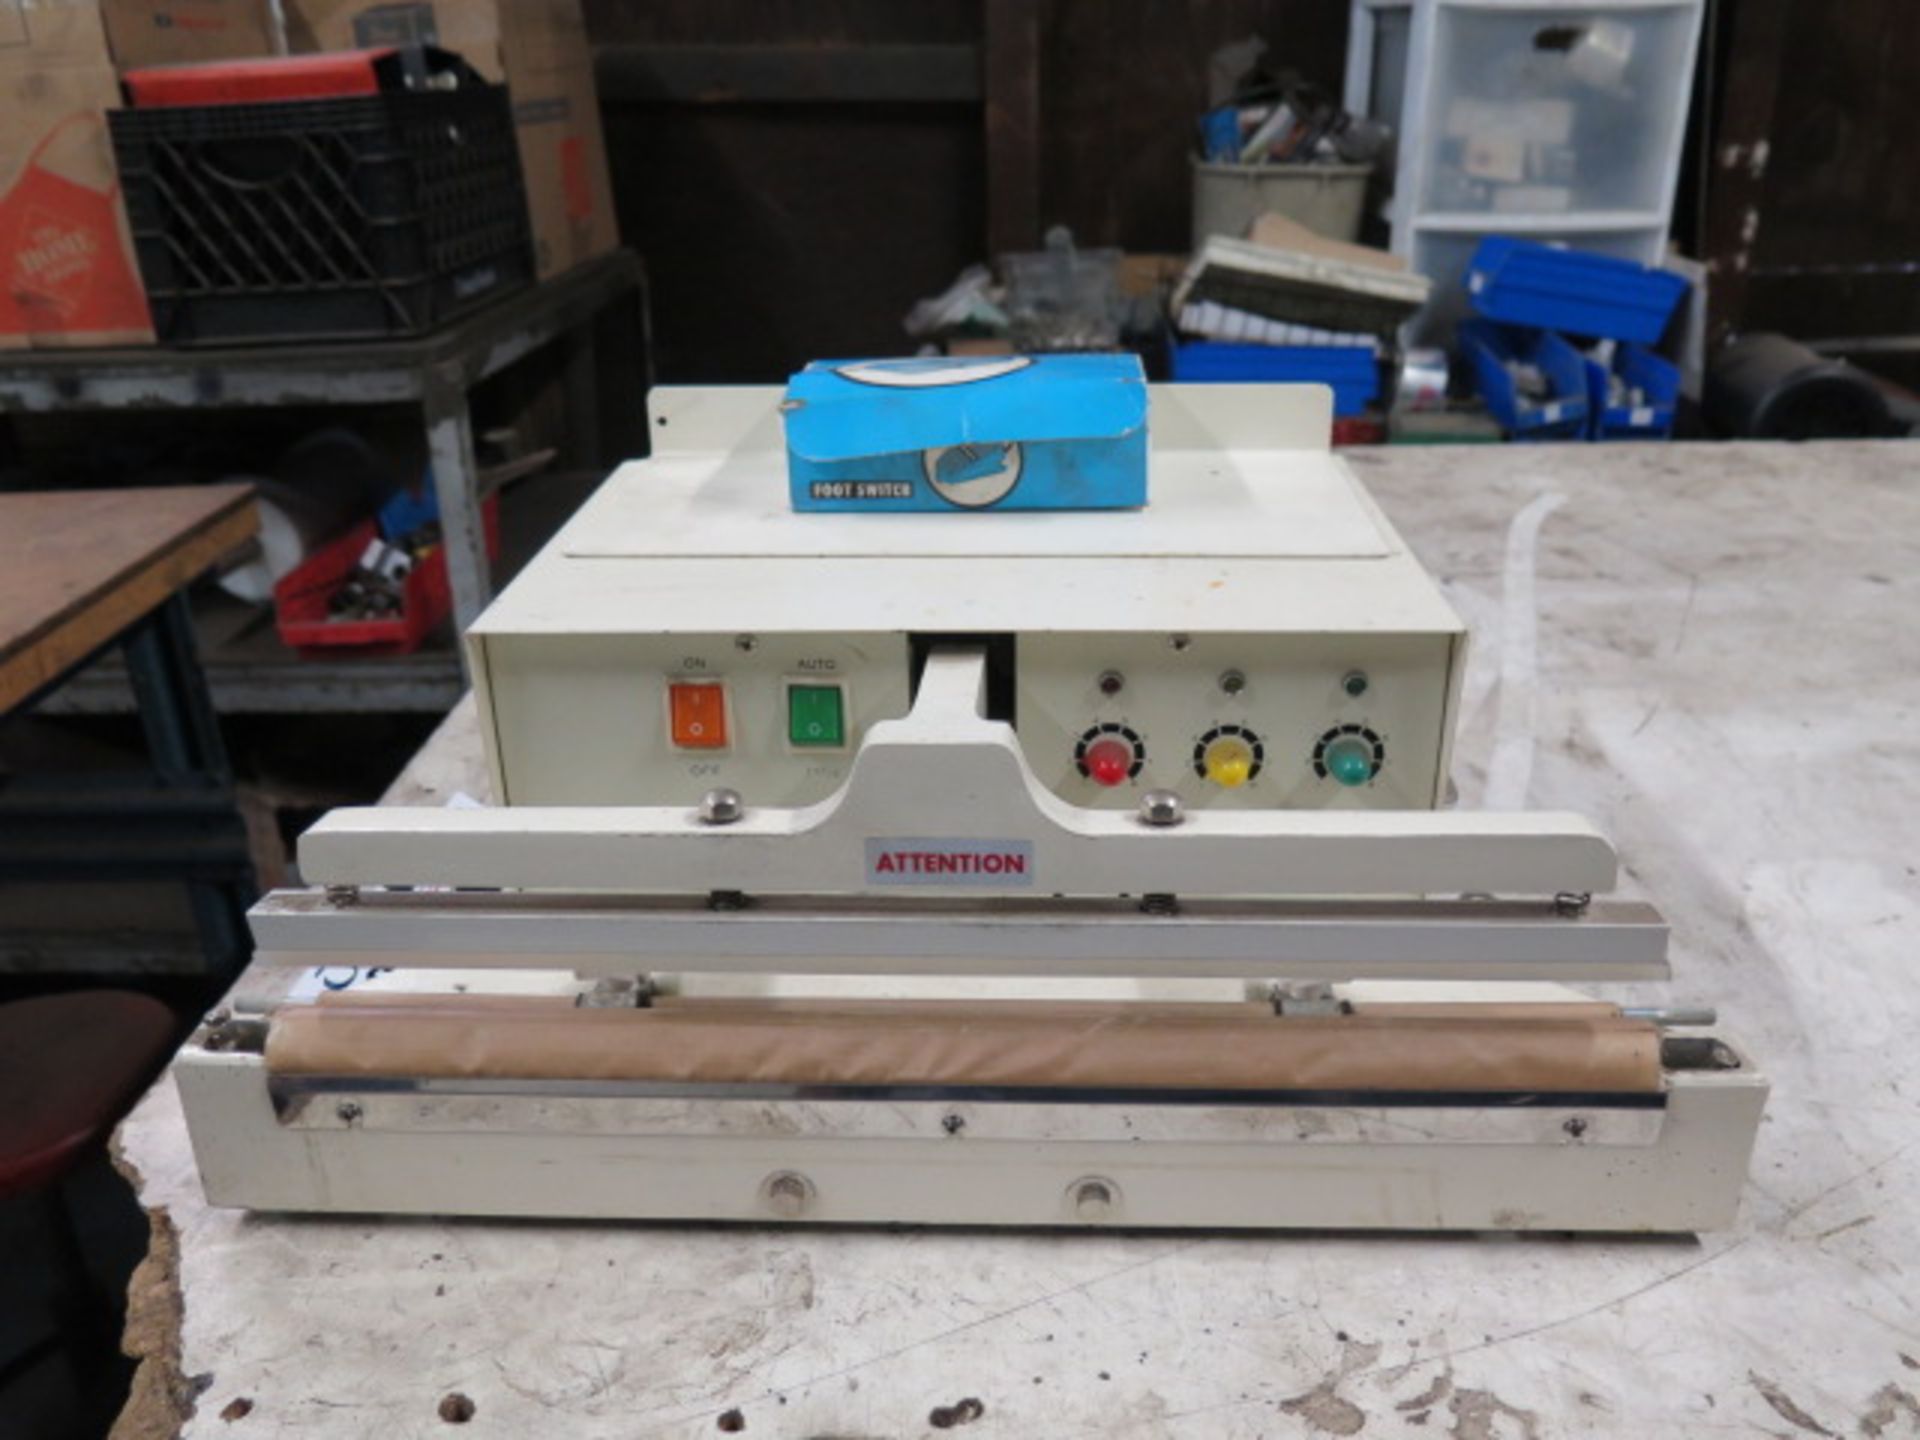 Import mdl. W-450A Impulse Bar Sealer w/ Foot Control (SOLD AS-IS - NO WARRANTY) - Image 2 of 7